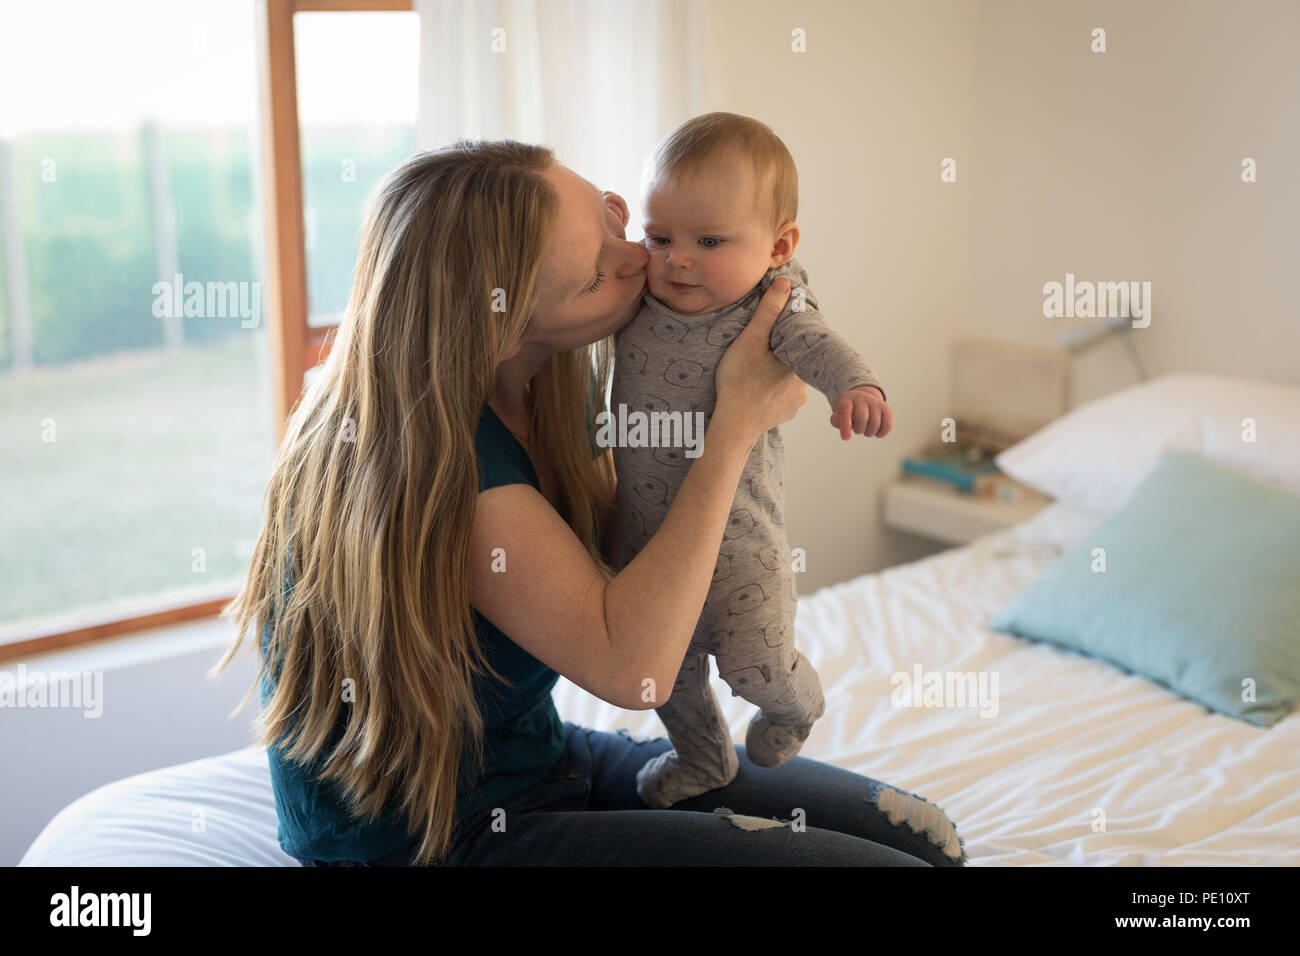 Mother kissing her baby boy Stock Photo